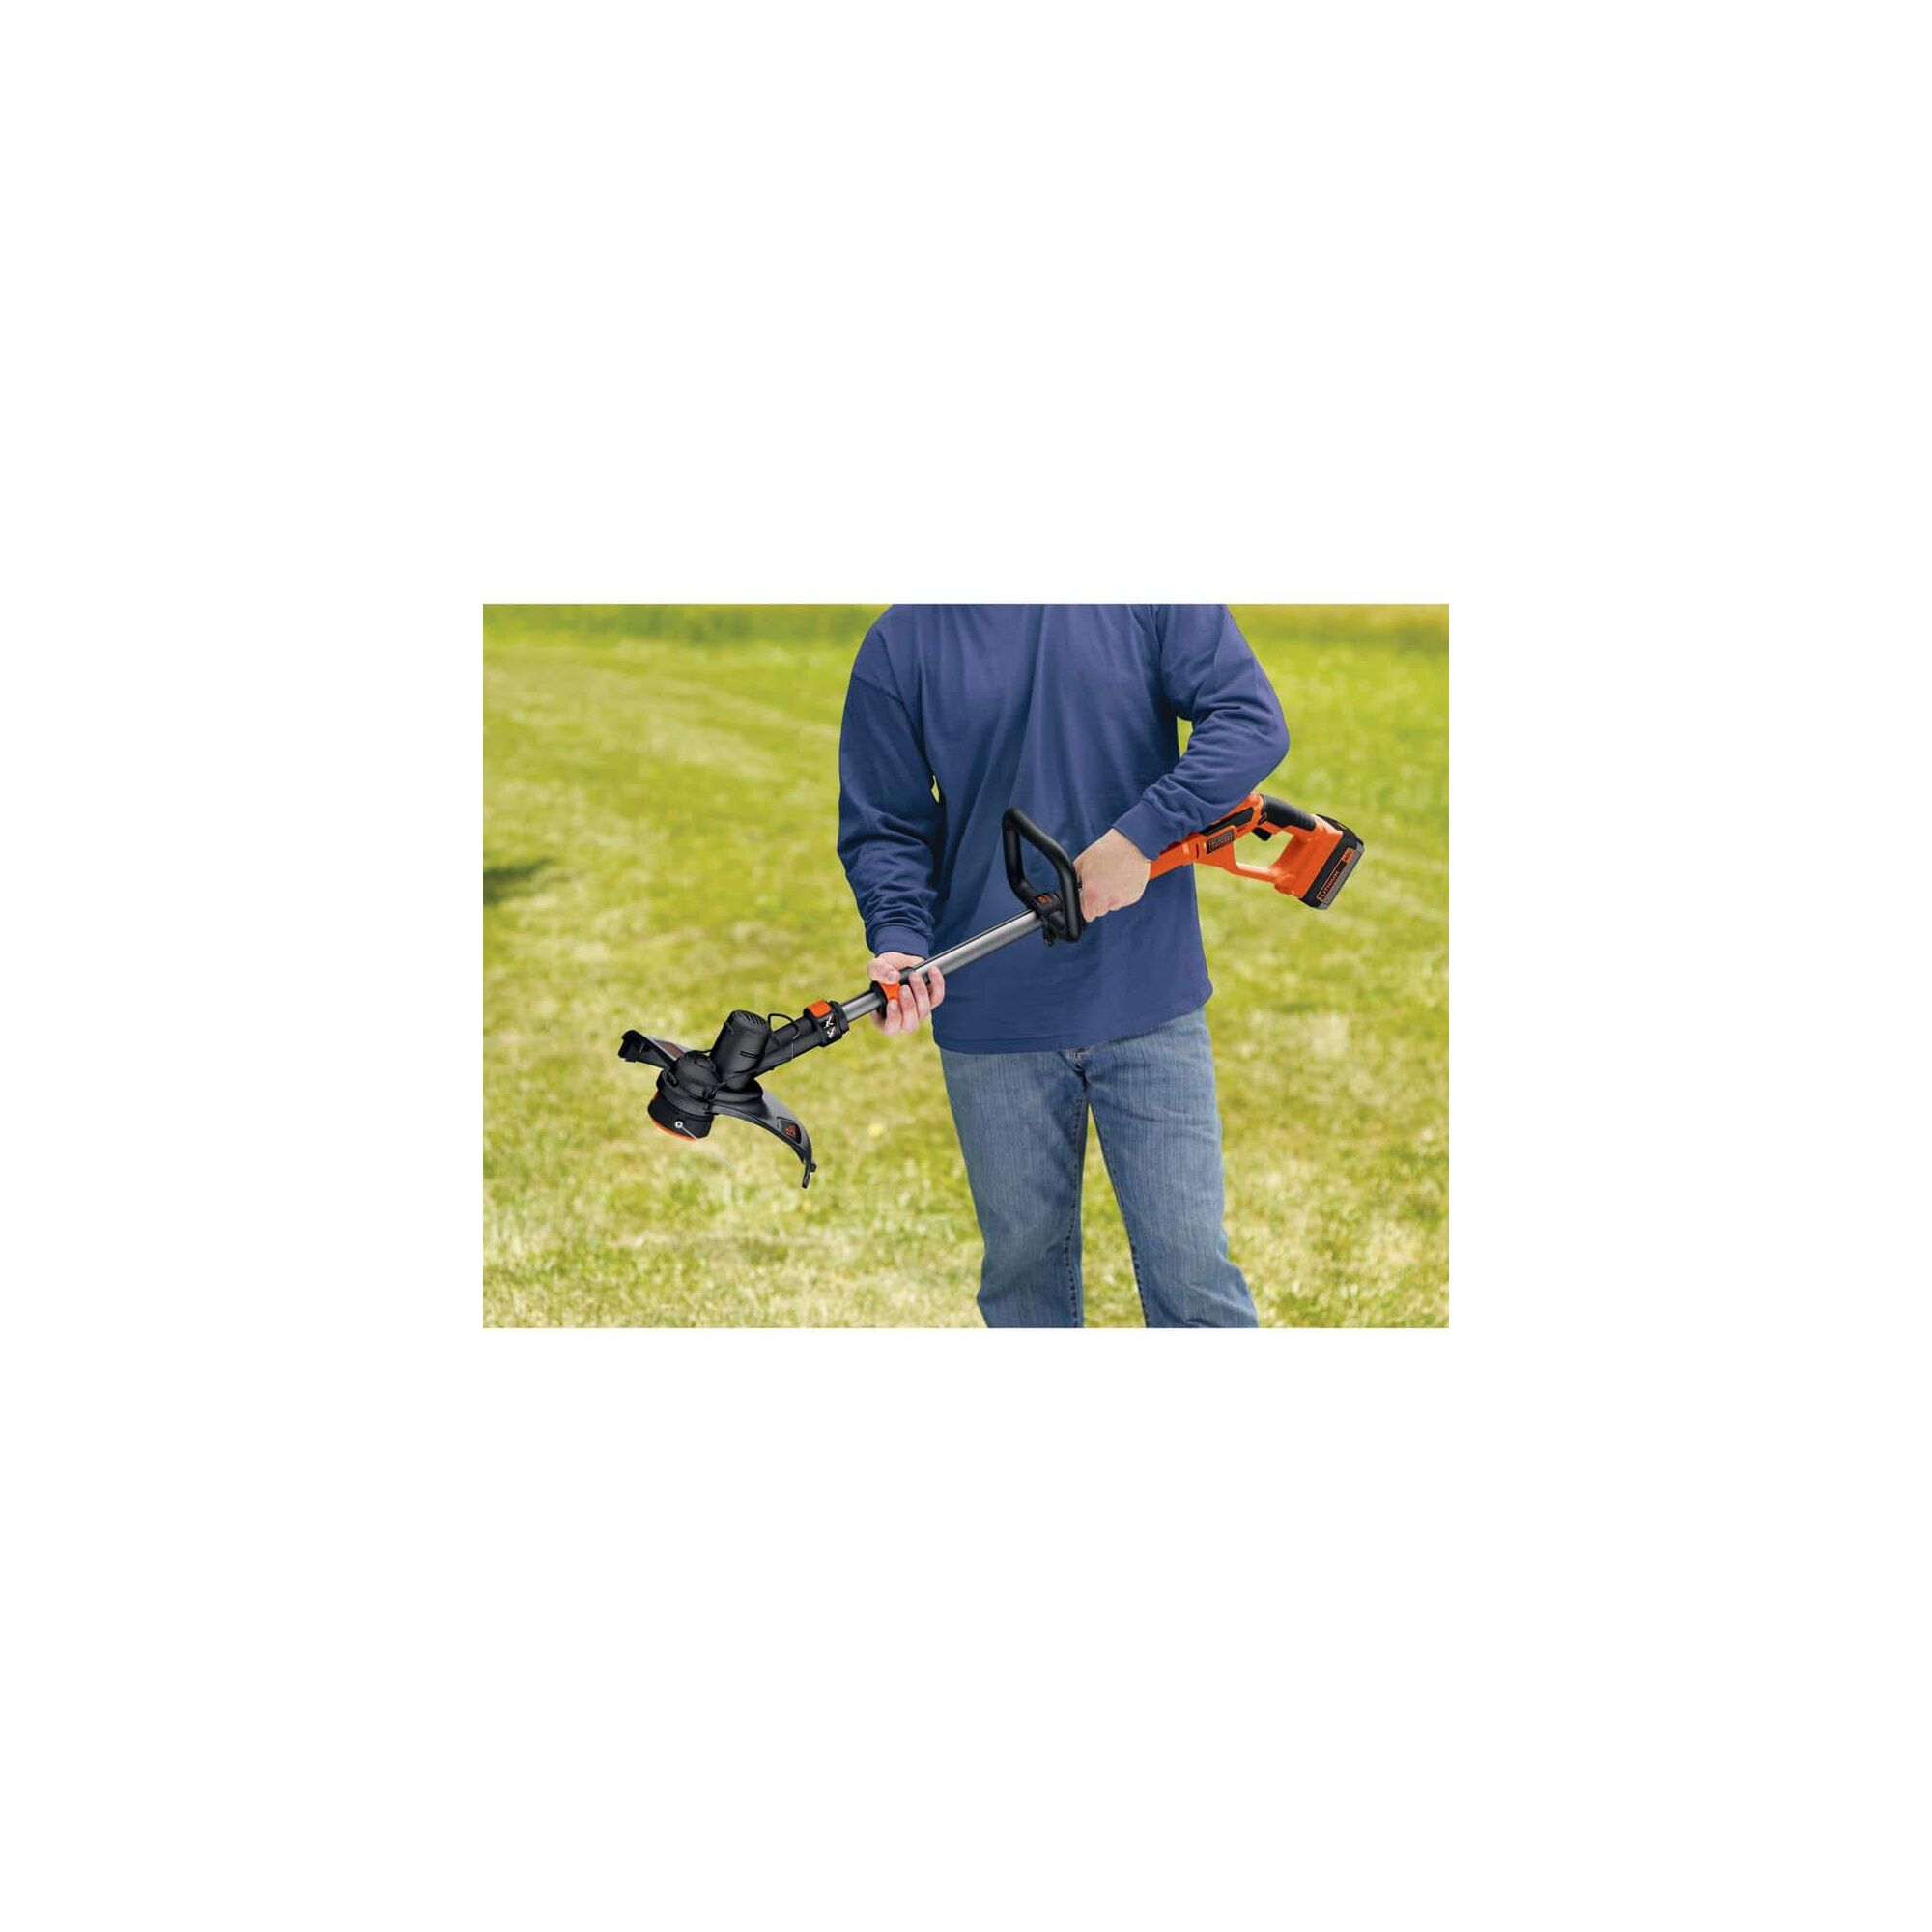 Person standing outside holding string trimmer